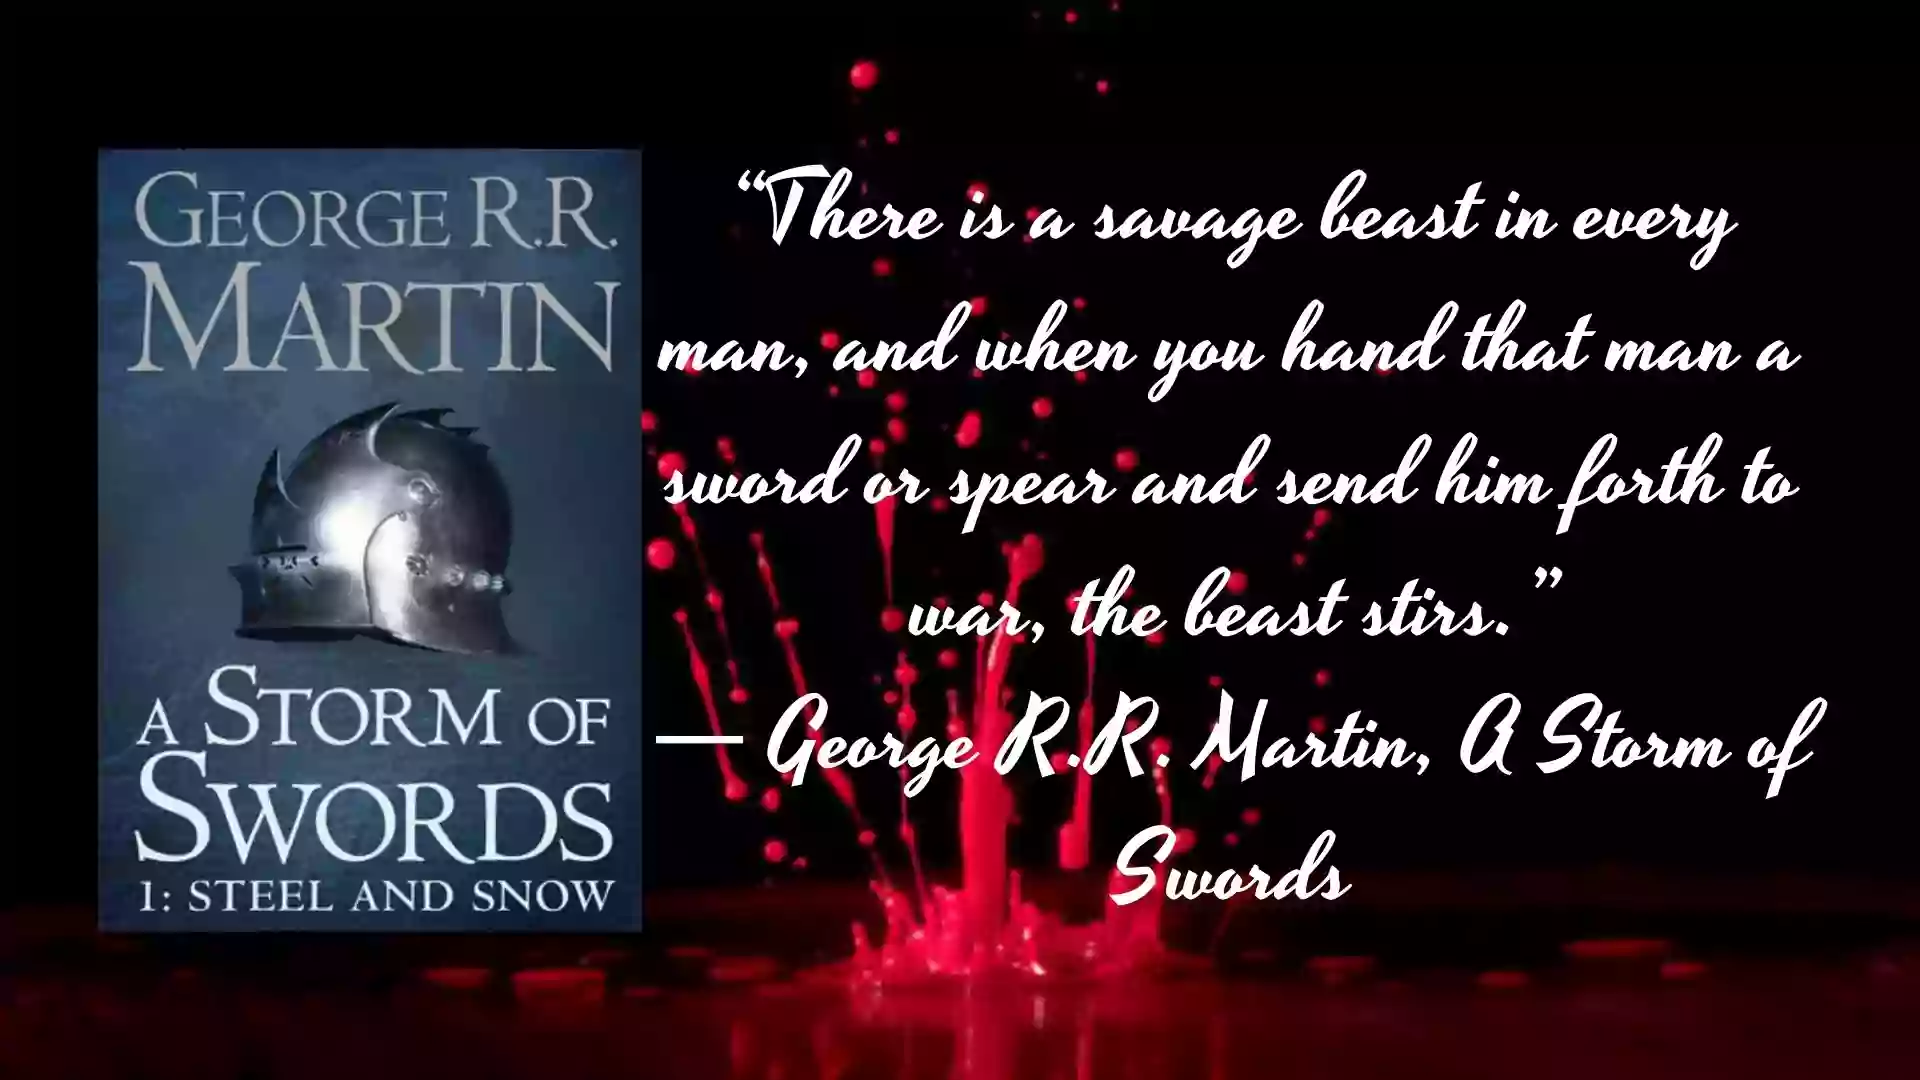 A Storm of Swords Parents Guide, Age Rating | A Song of Ice and Fire Book3